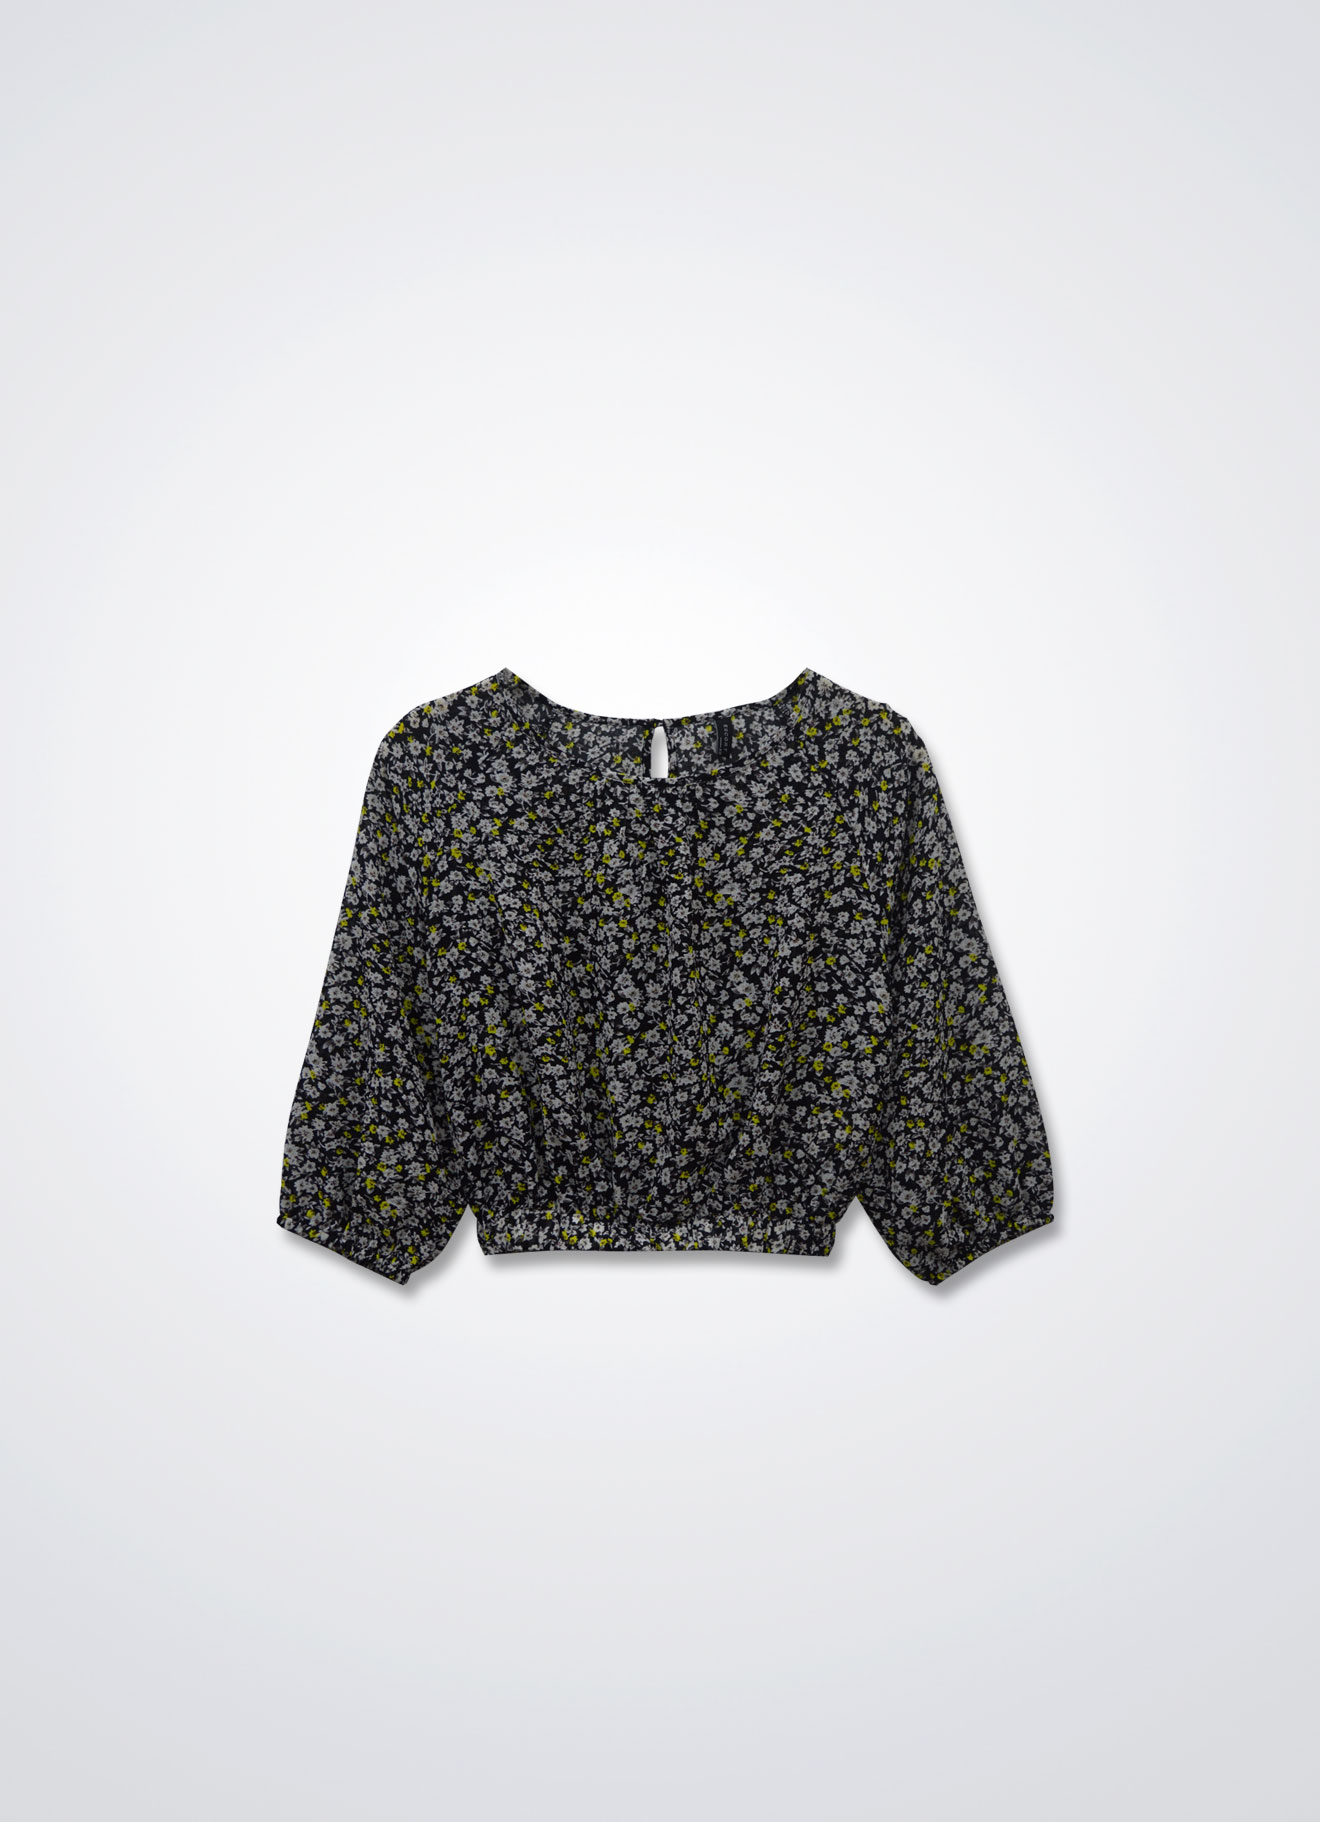 Licorice by Floral Printed Blouse